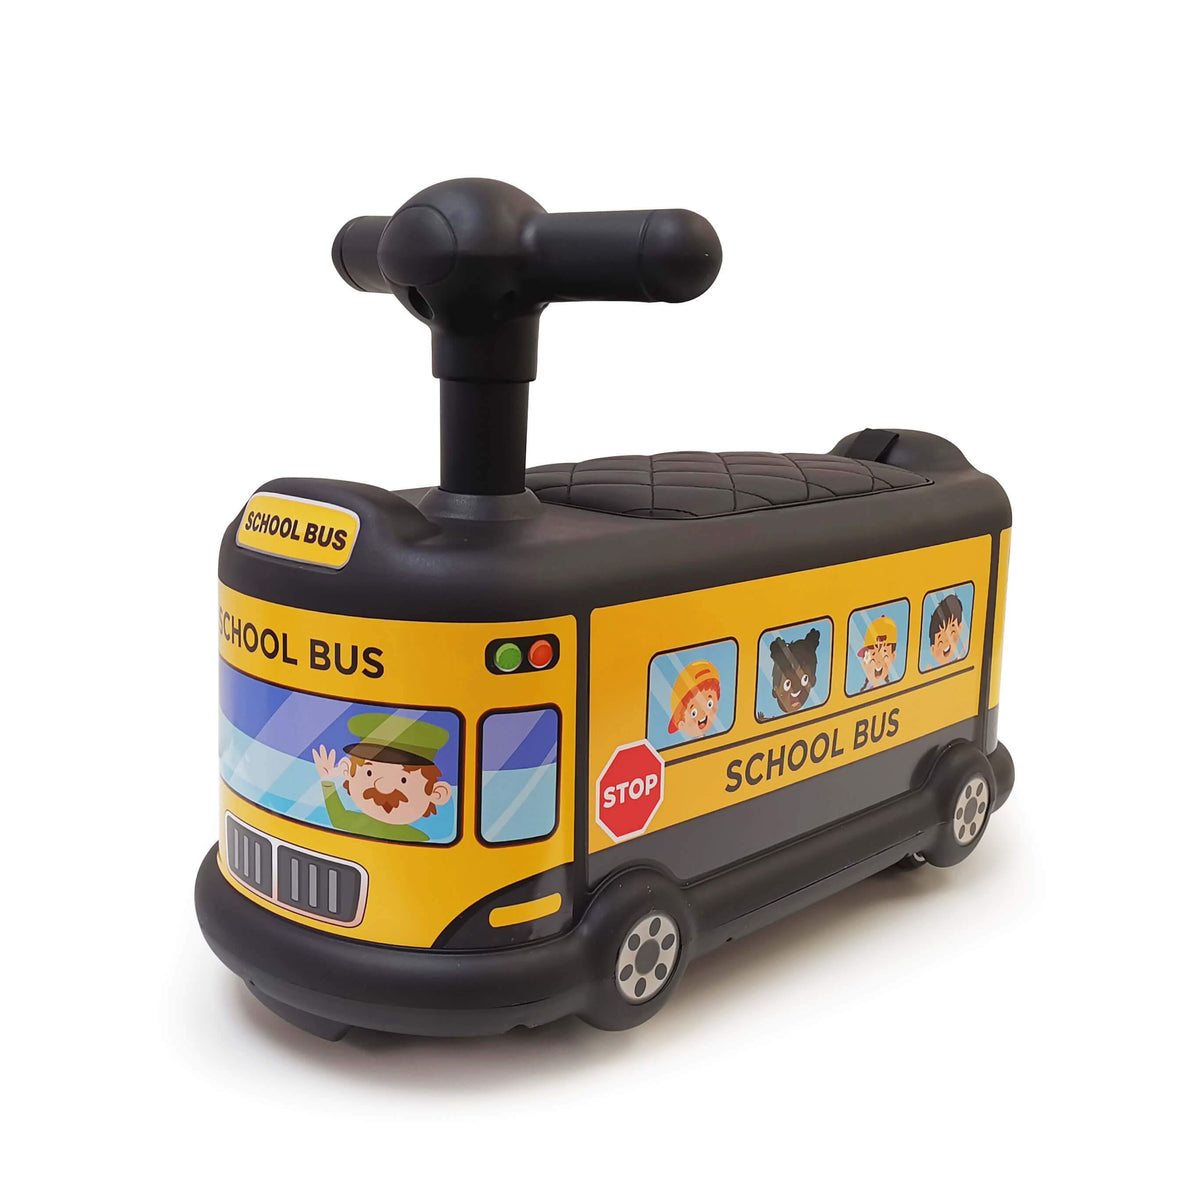 Voltz Toys School Bus Ride On Push Car Foot To Floor Toy For Kids And Toddlers - Yellow